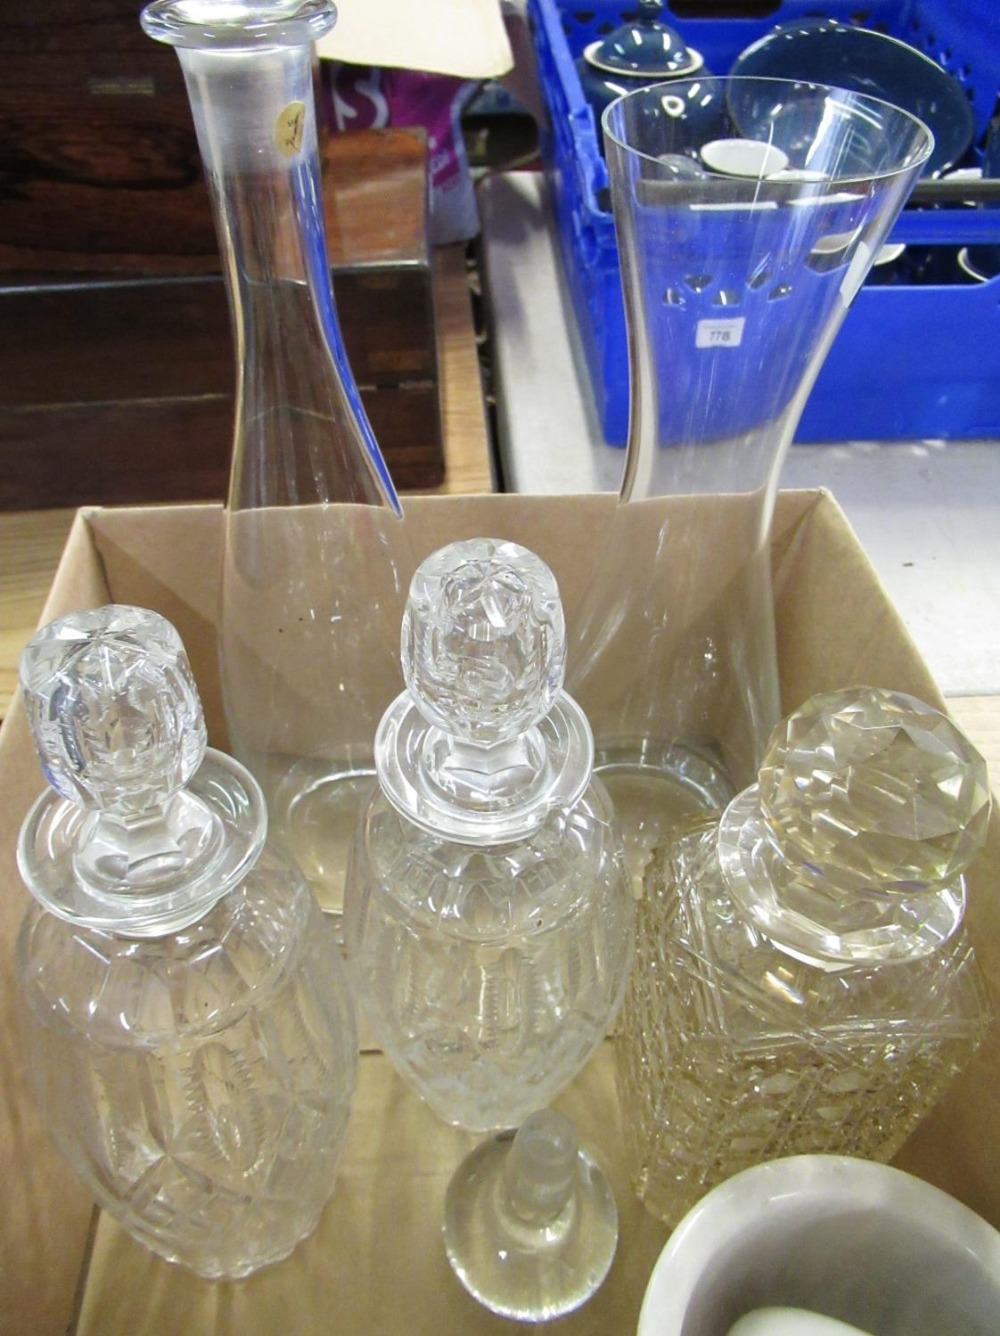 Pair of glass decanters, another square cut decanter, and two wine carafes